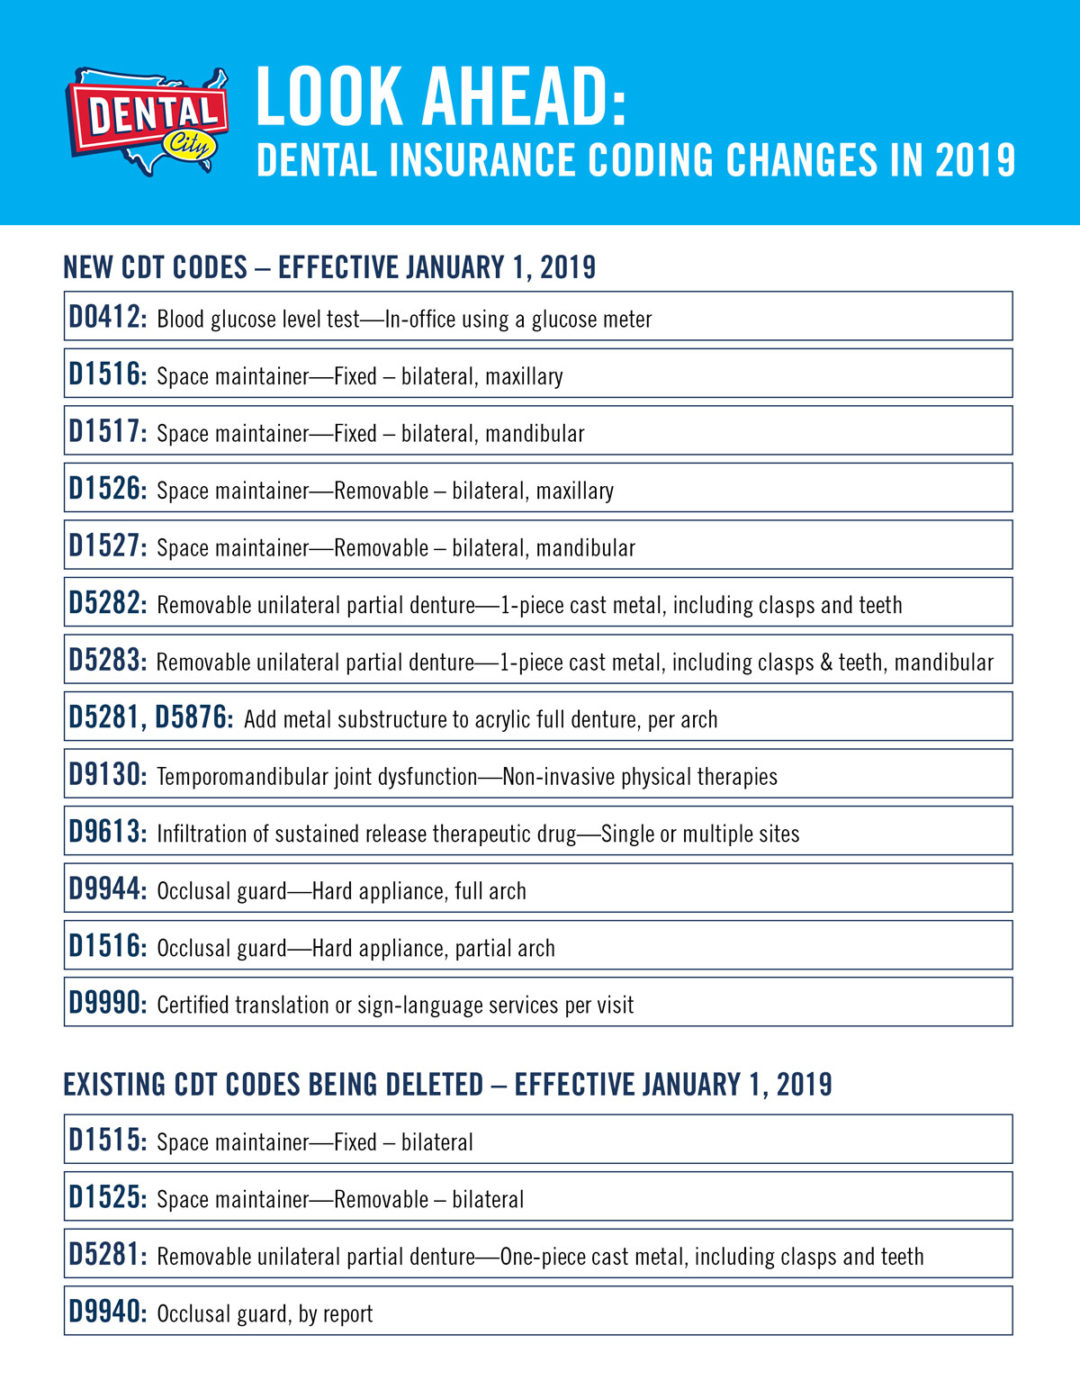 [INFOGRAPHIC] Dental Insurance Coding Changes in 2019.